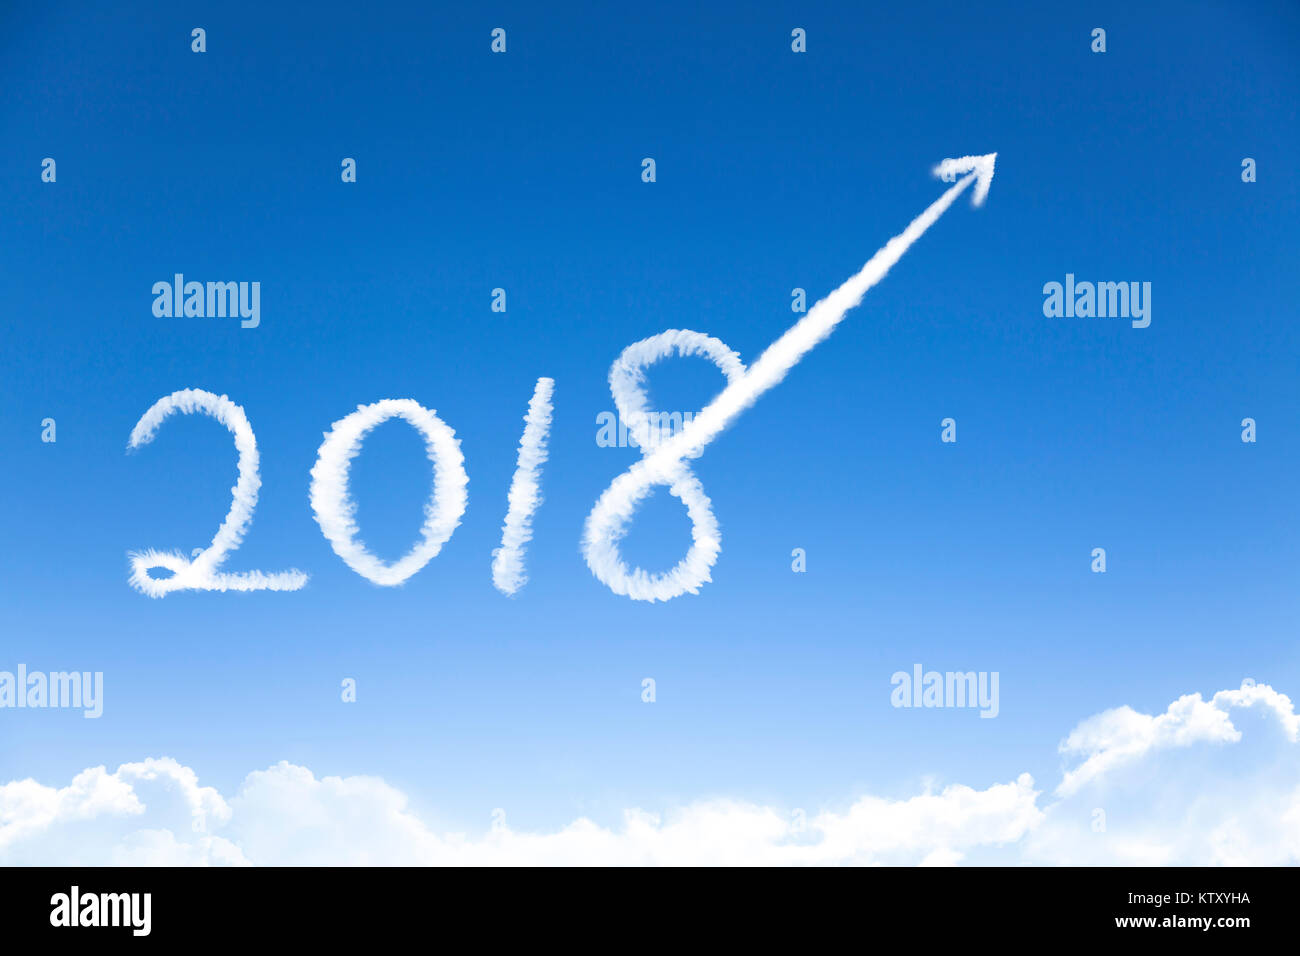 happy new year 2018 and business growth concept by cloud Stock Photo